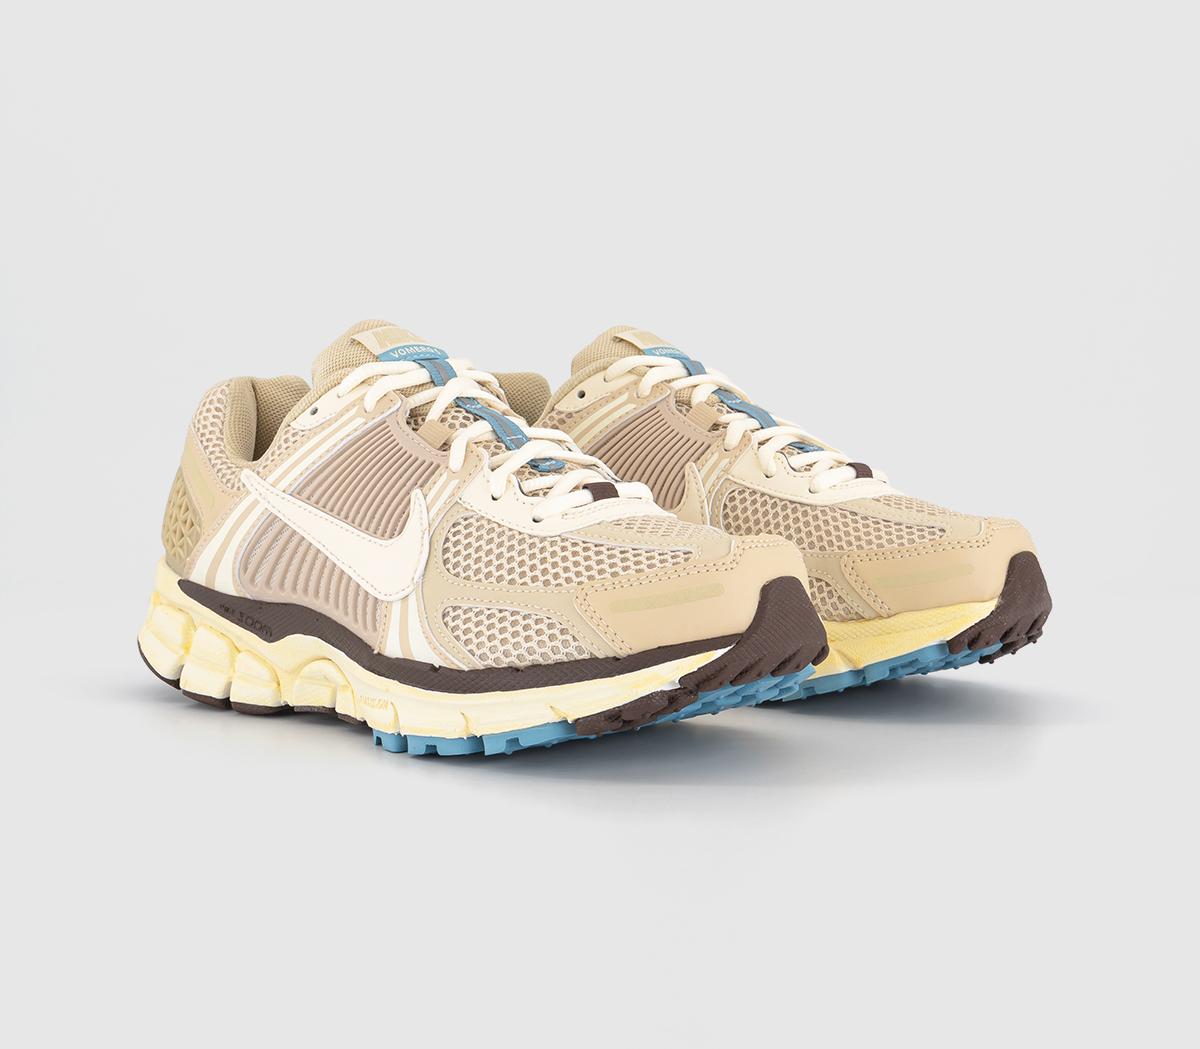 Nike Womens Zoom Vomero 5 Trainers Oatmeal Pale Ivory Sail Light Chocolate Worn Blue Natural, 10.5